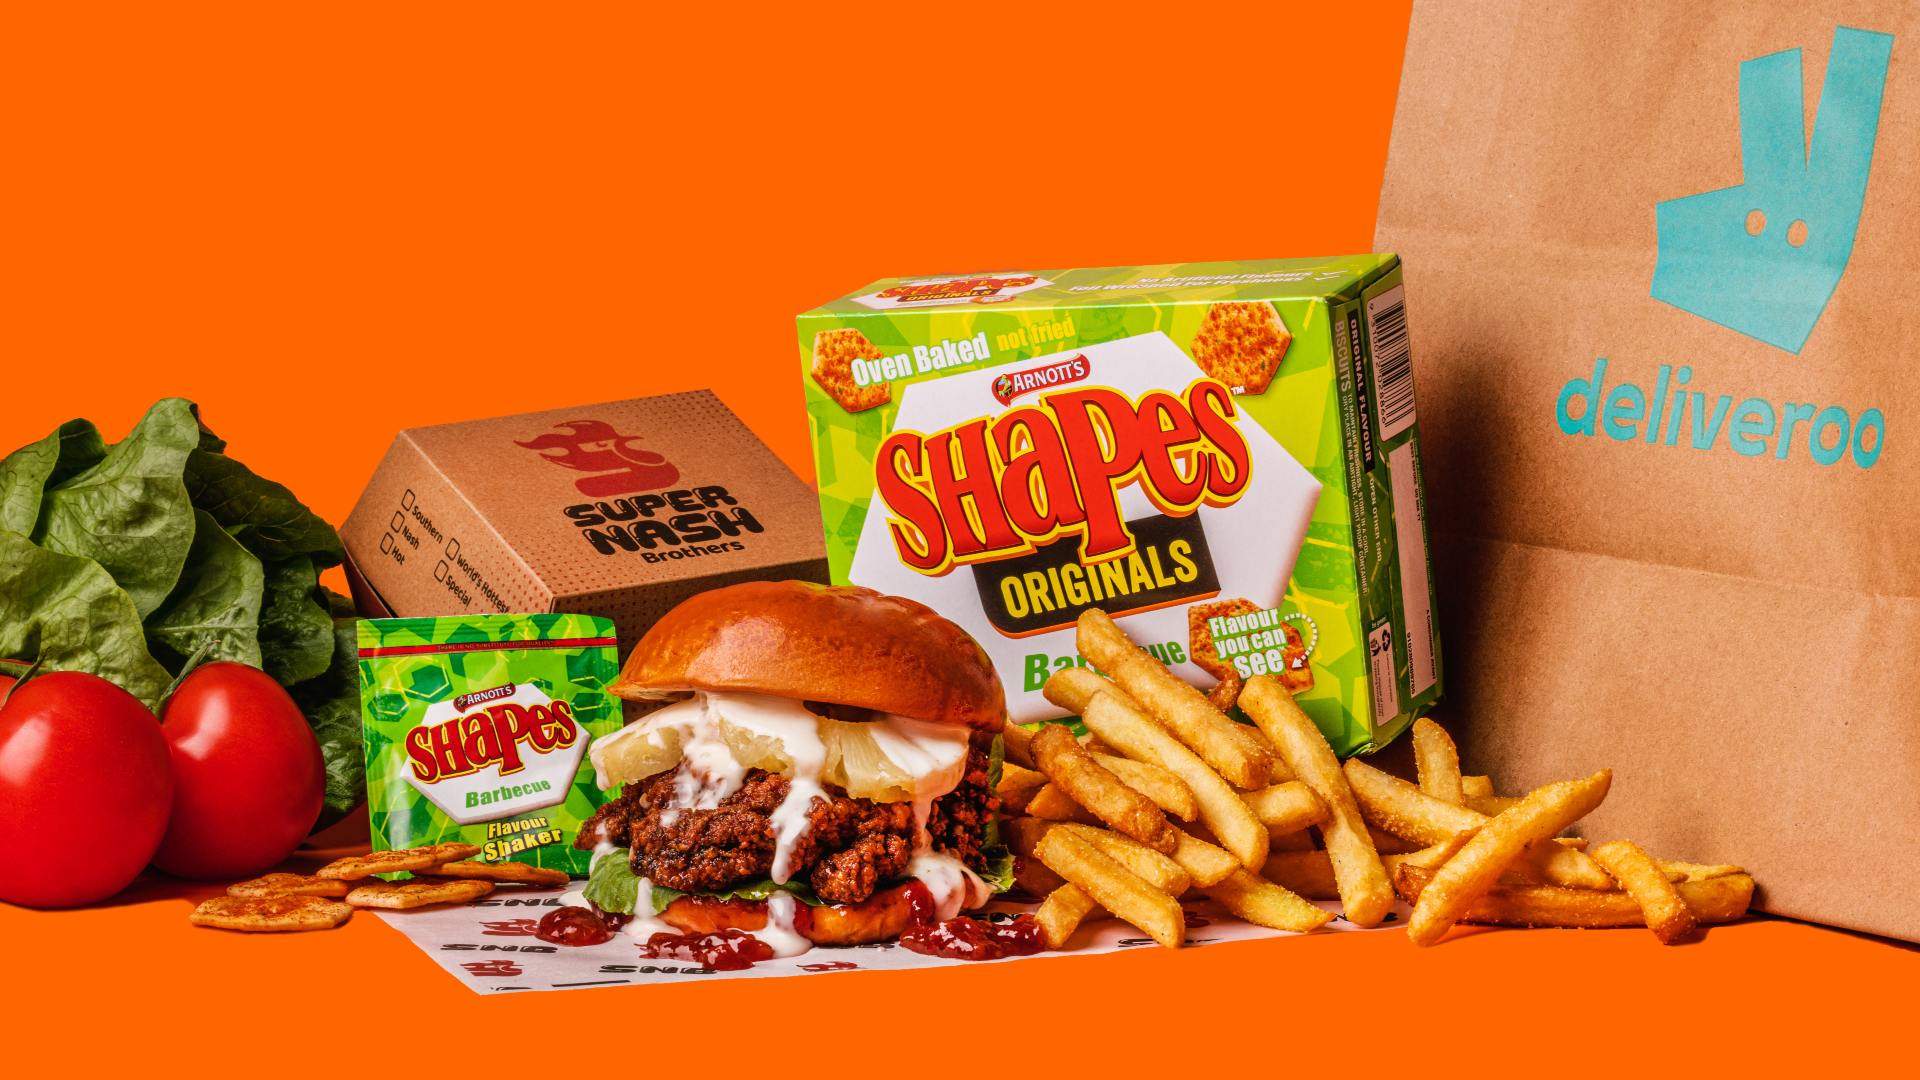 Fried Chicken Chain Super Nash Brothers Has Just Launched a Limited-Edition Barbecue Shapes Burger